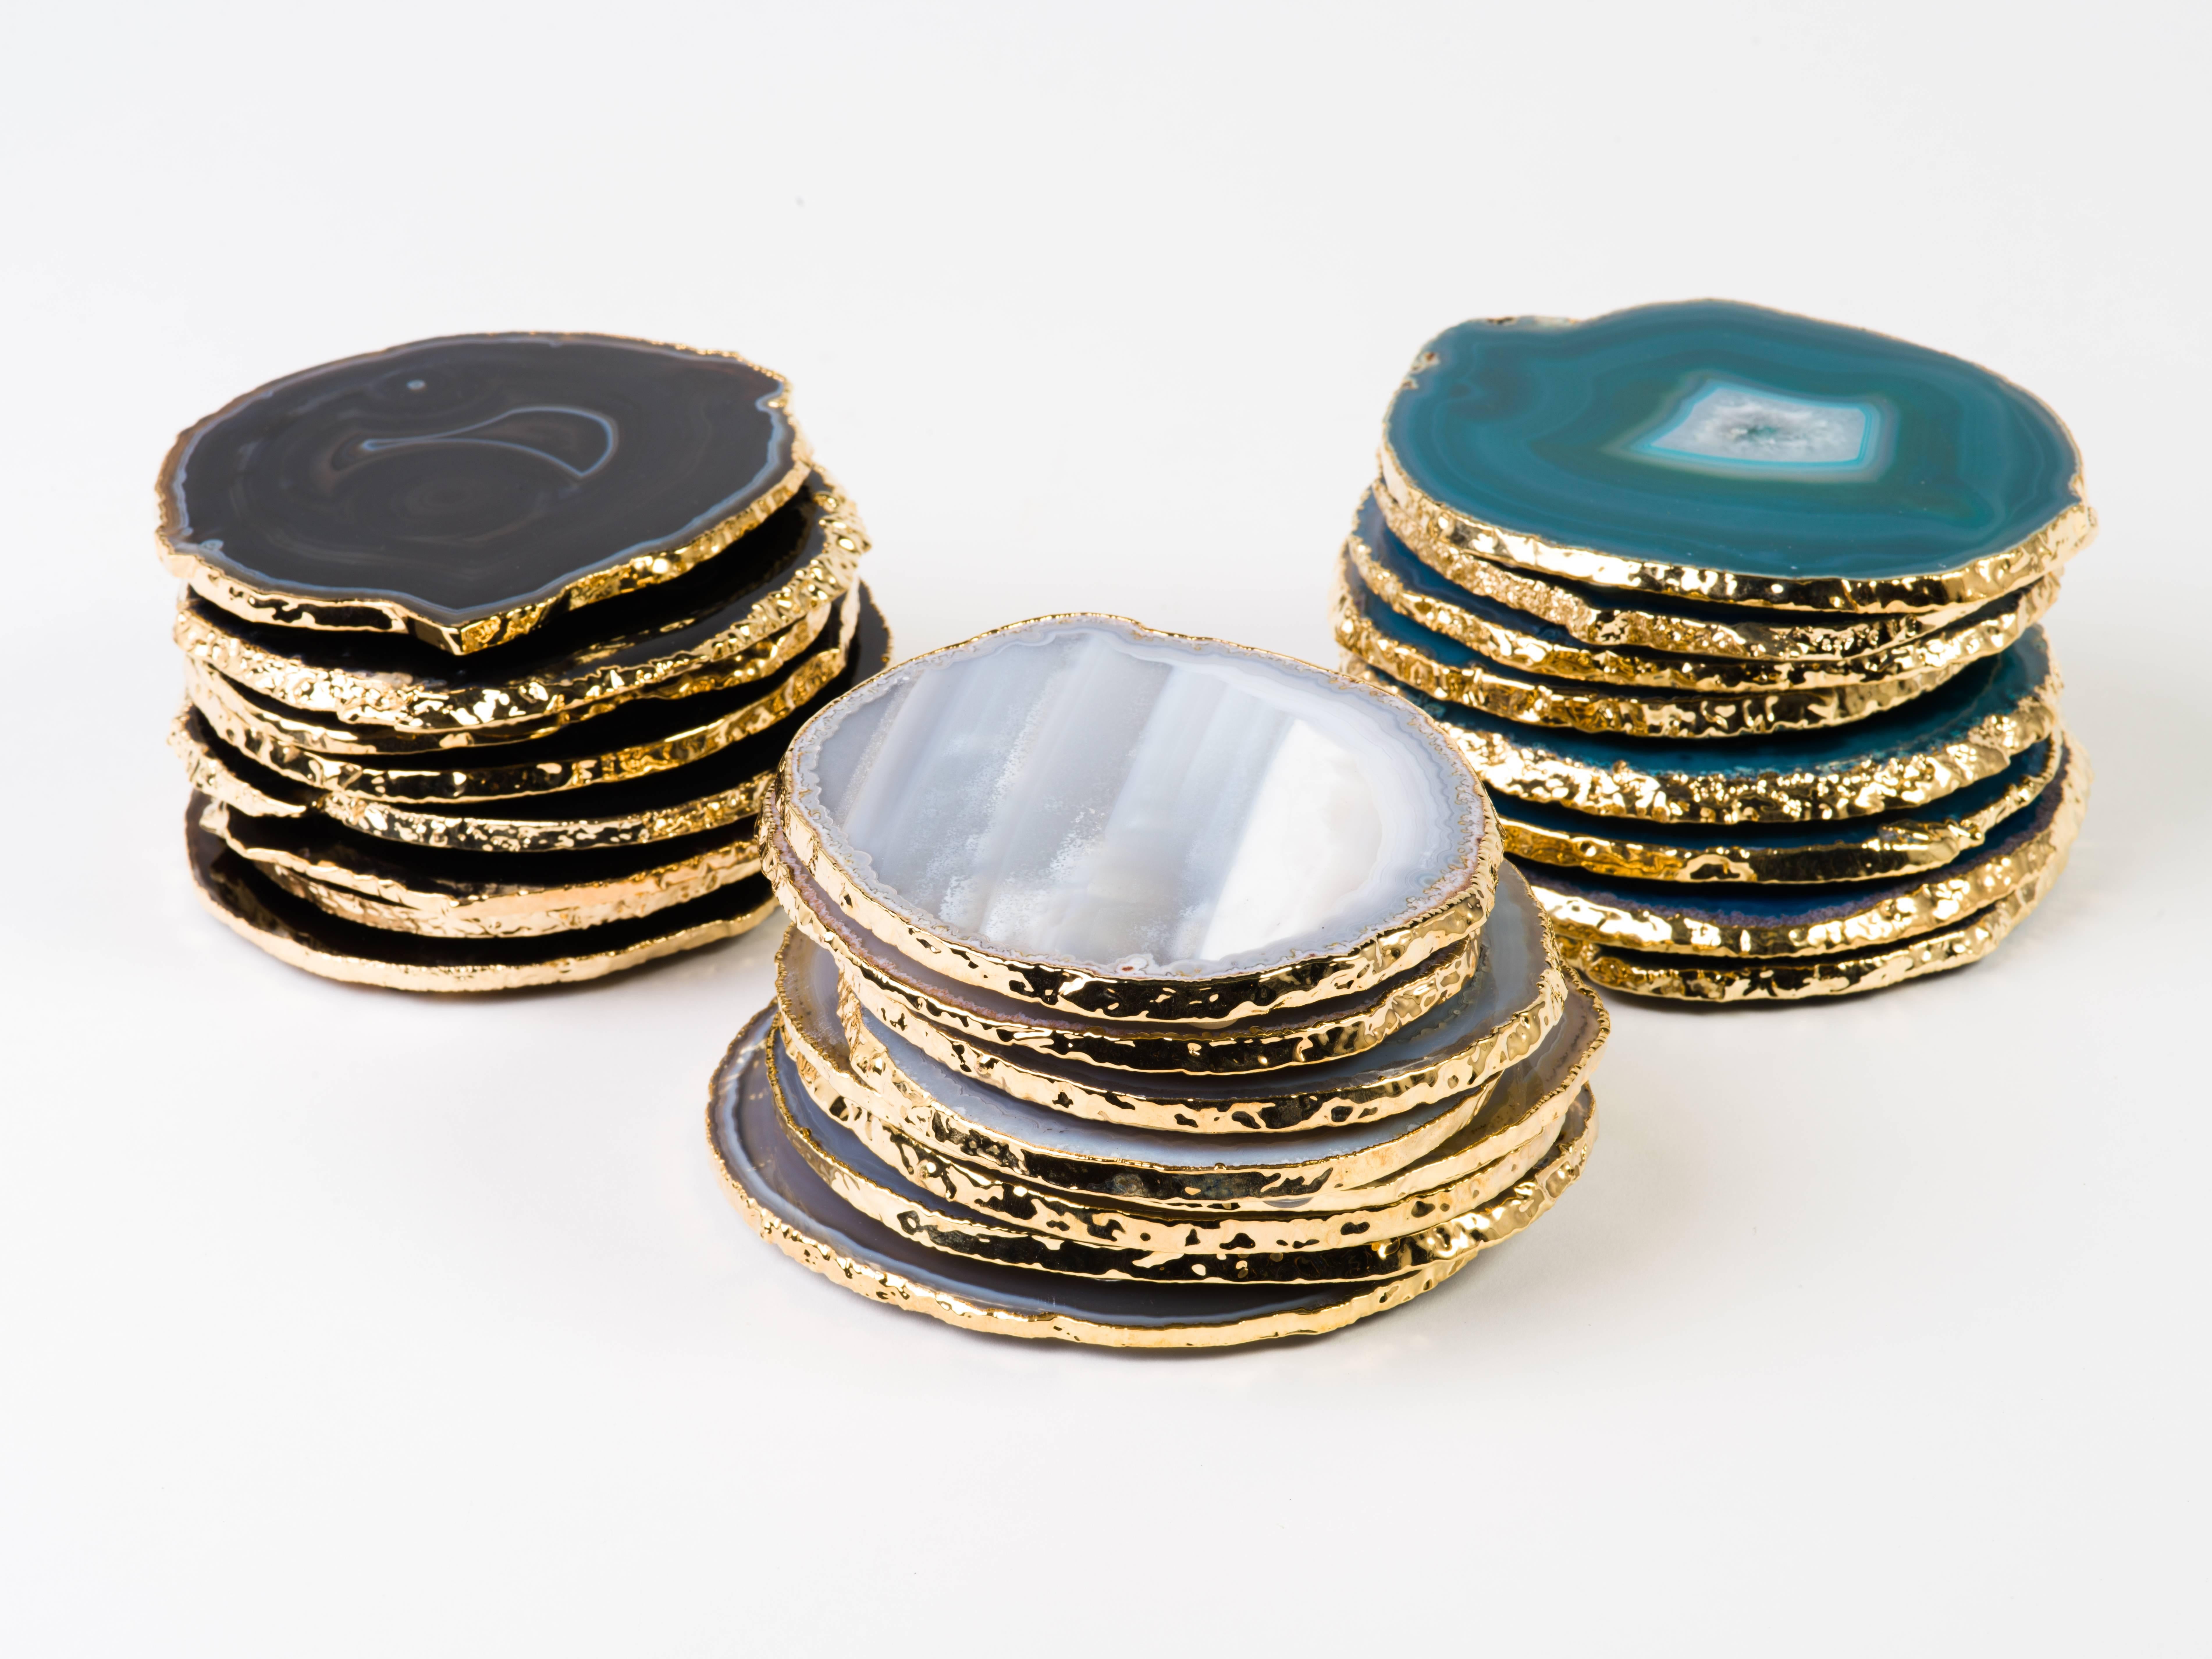 Stunning natural agate and crystal coasters with 24-karat gold plated edges. Three color variations are available: Teal, onyx or grey. Polished fronts and natural rough edges. No two pieces are alike. Make beautiful accessories to any coffee table